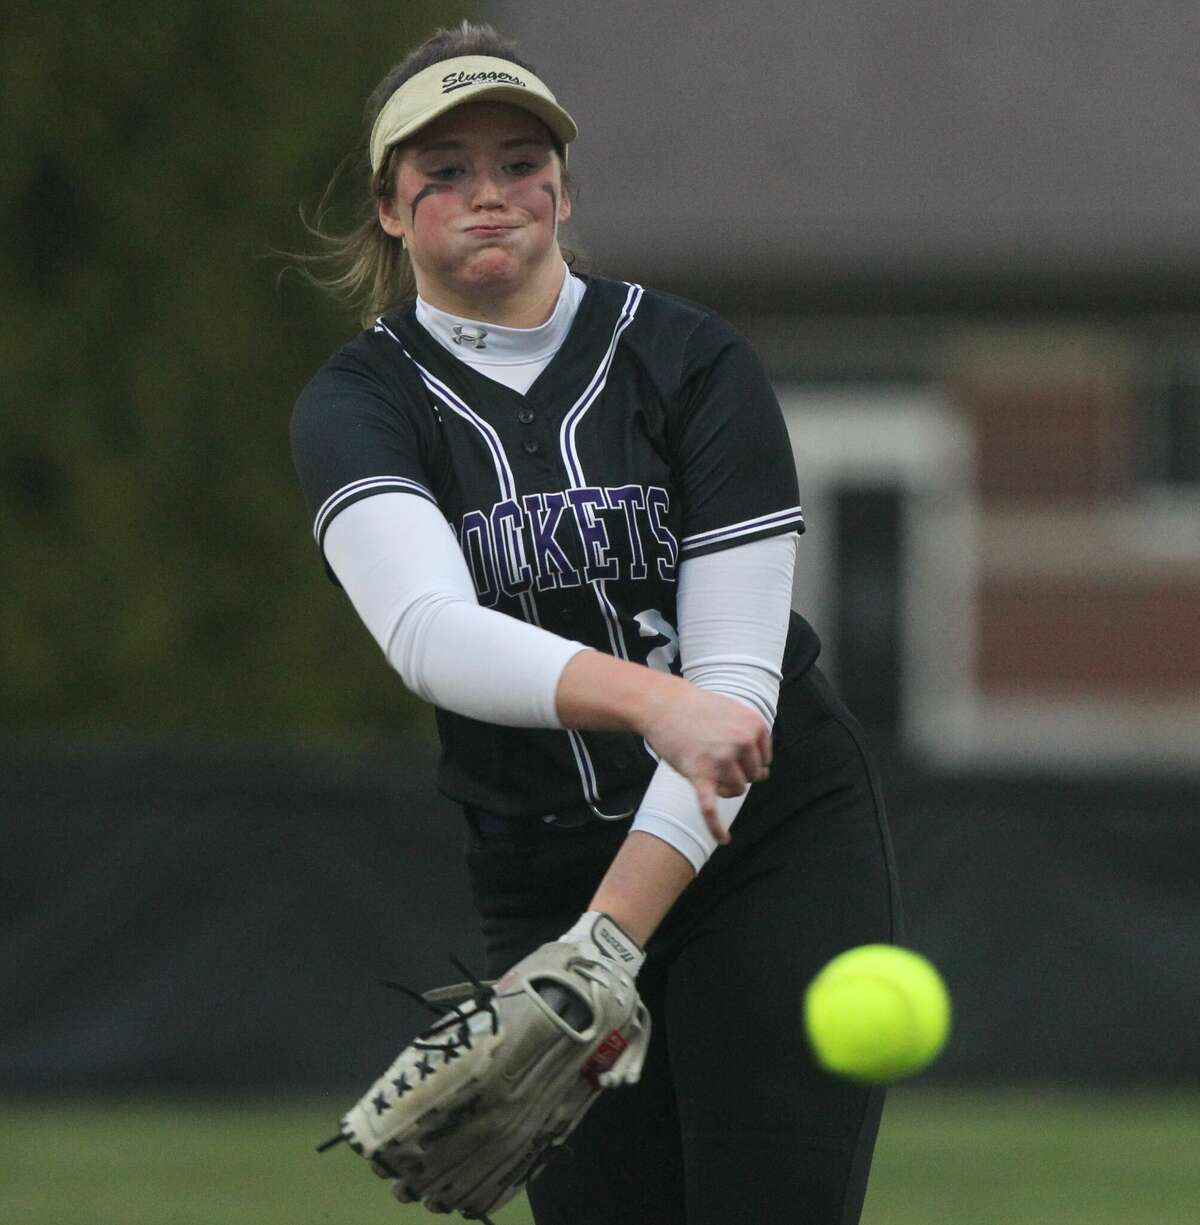 Action from the Routt softball team's game against Pleasant Hill at Future Champions in Jacksonville on Thursday